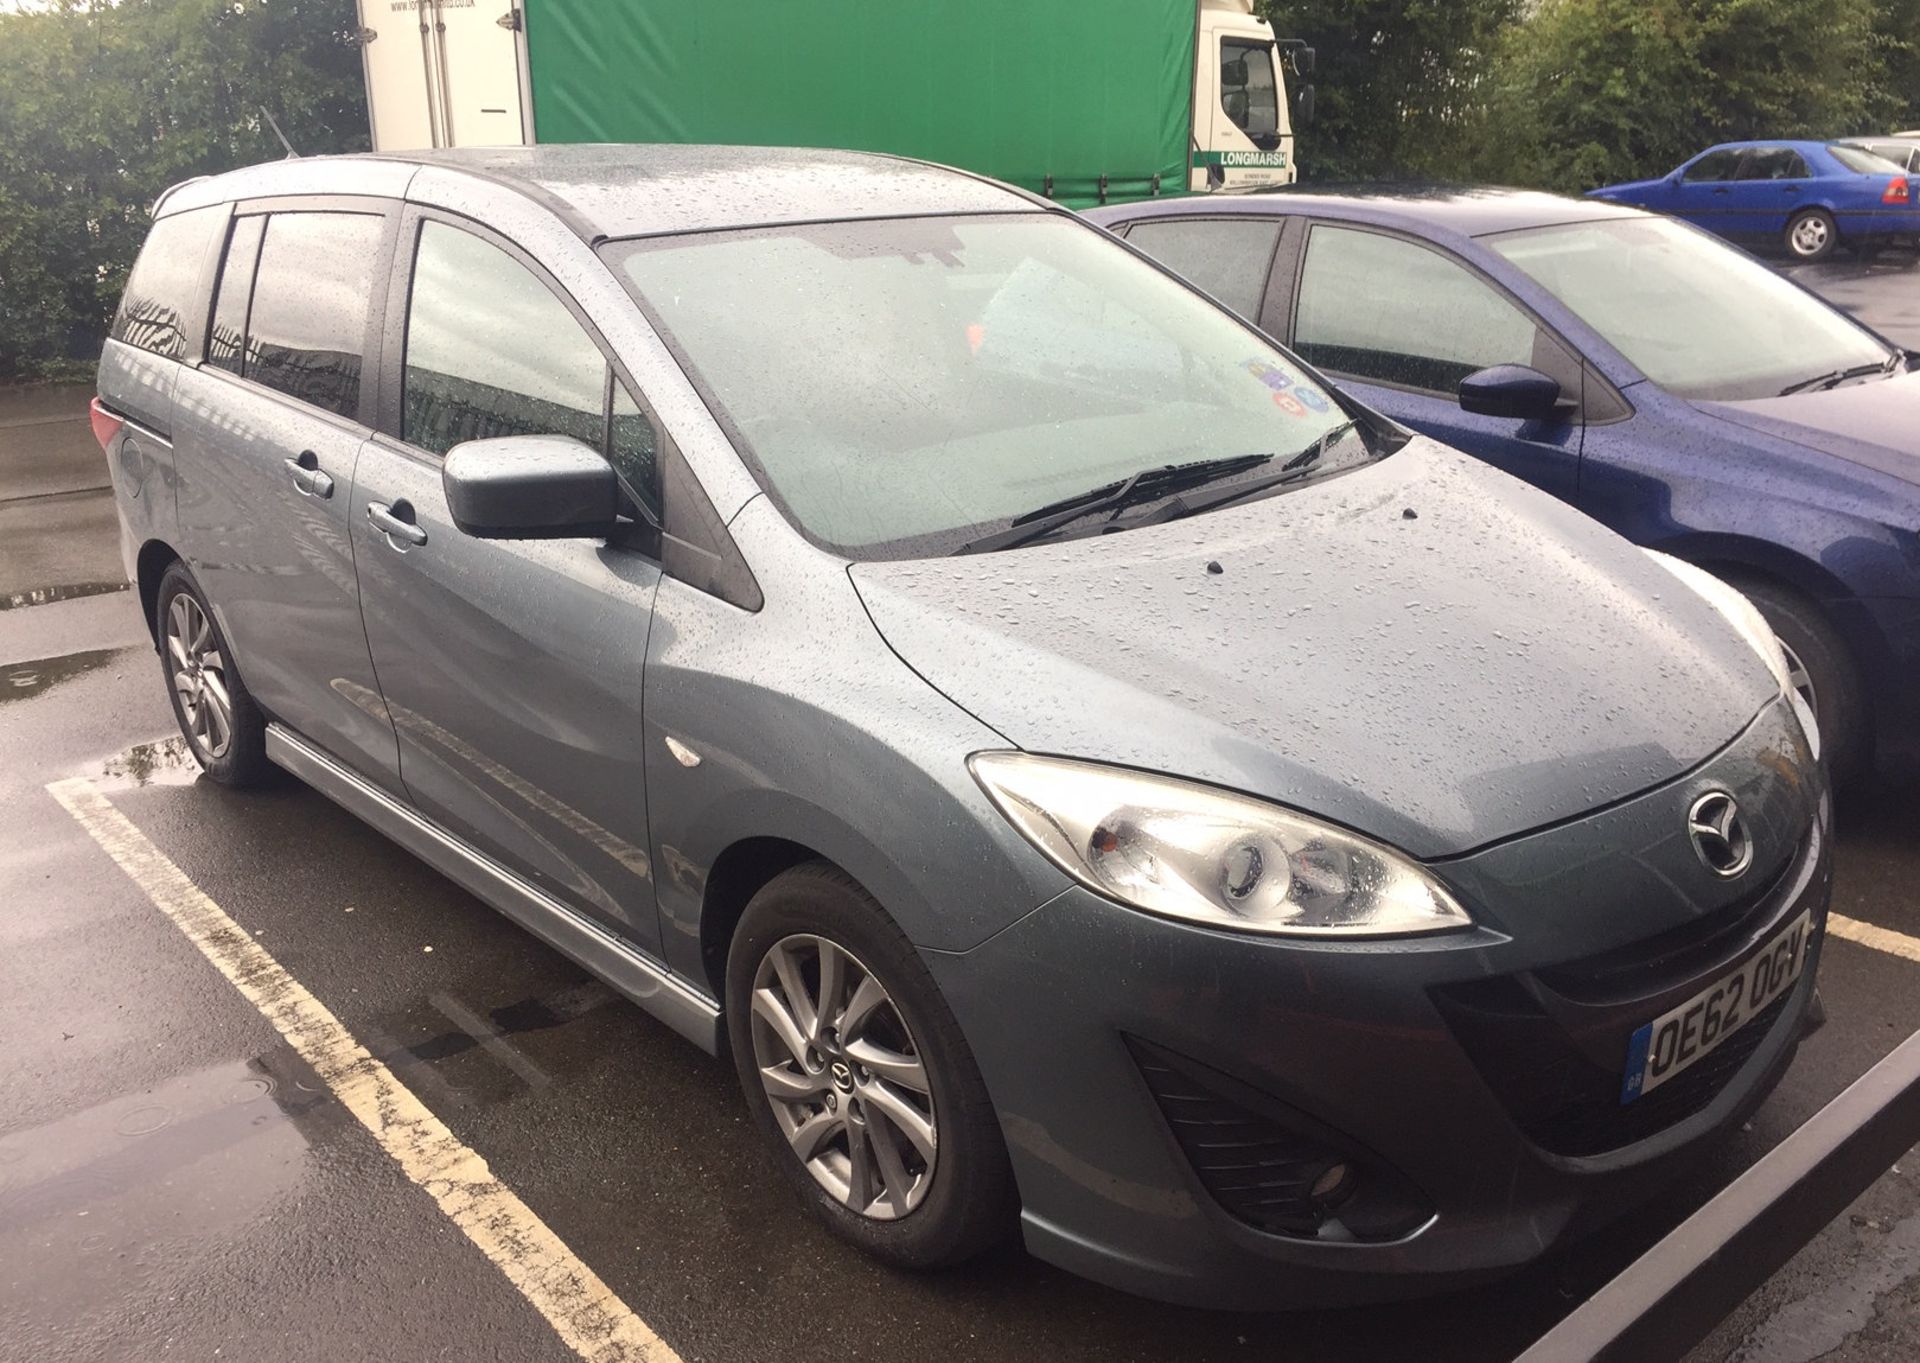 2013 Mazda 5 2.0 Venture Edition 5 Dr MPV - CL505 - NO VAT ON THE HAMMER - Location: Corby, N - Image 10 of 18